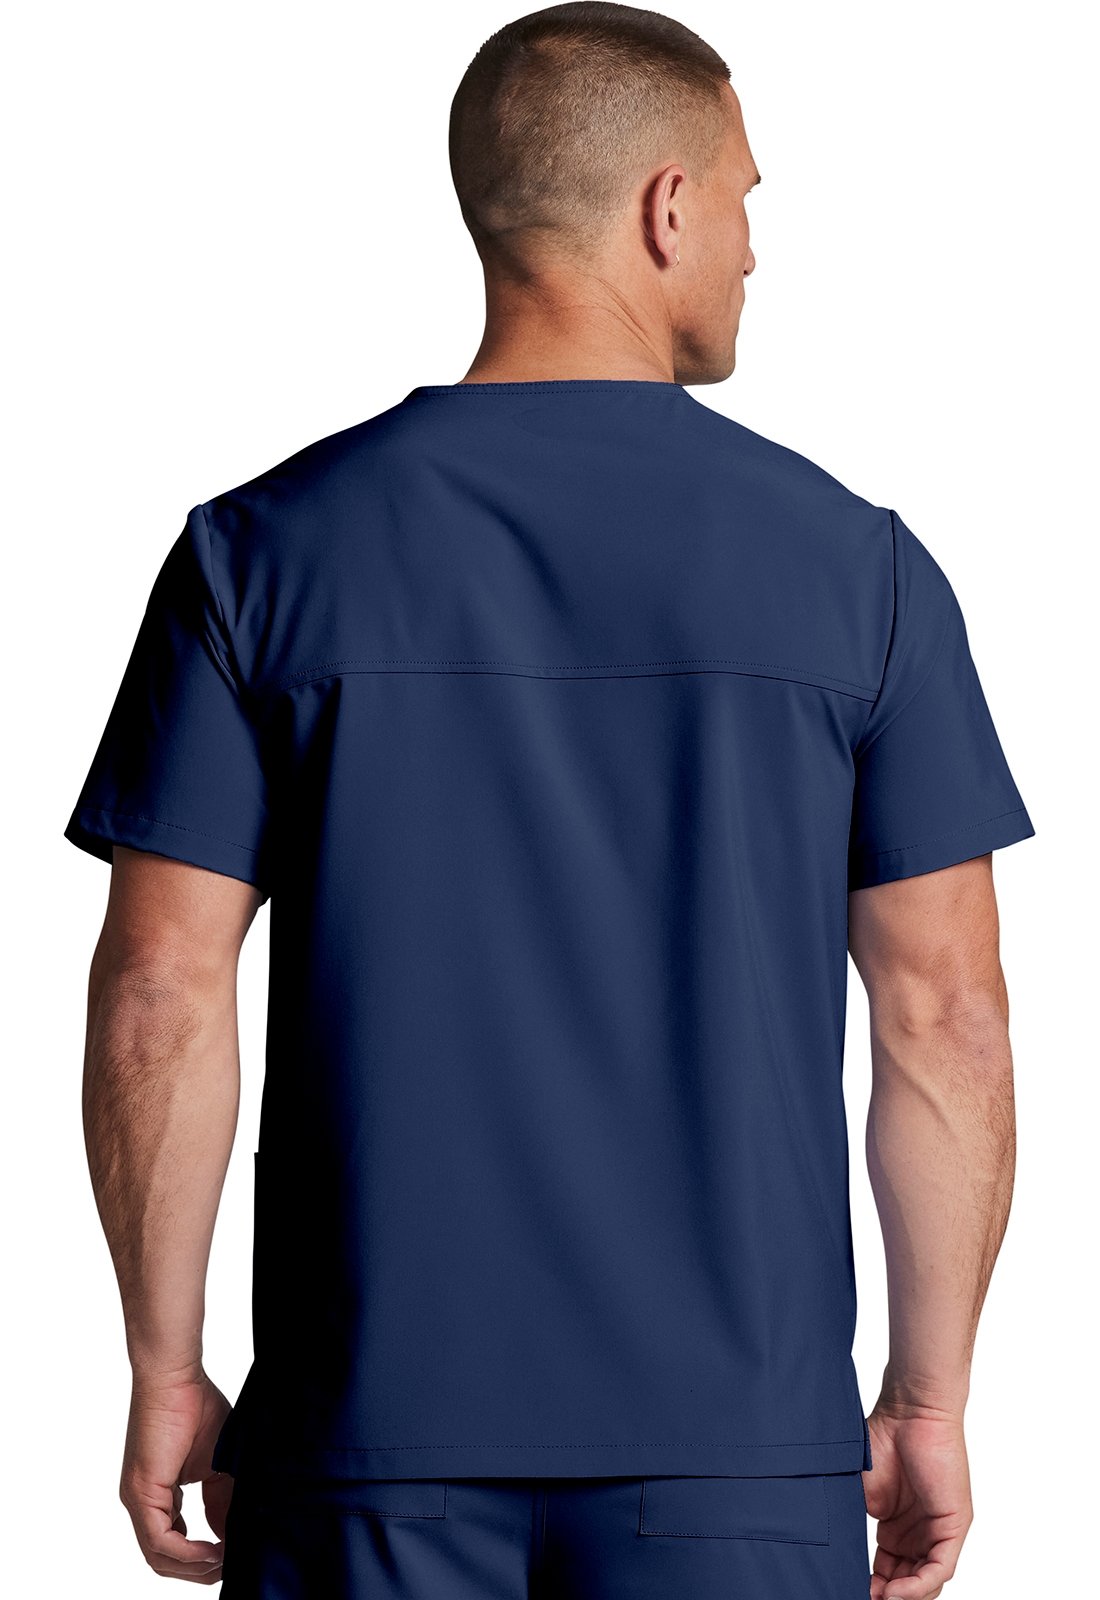 Dickies Everyday Scrubs Unisex V-neck Top DK619 | Medical Scrubs Collection